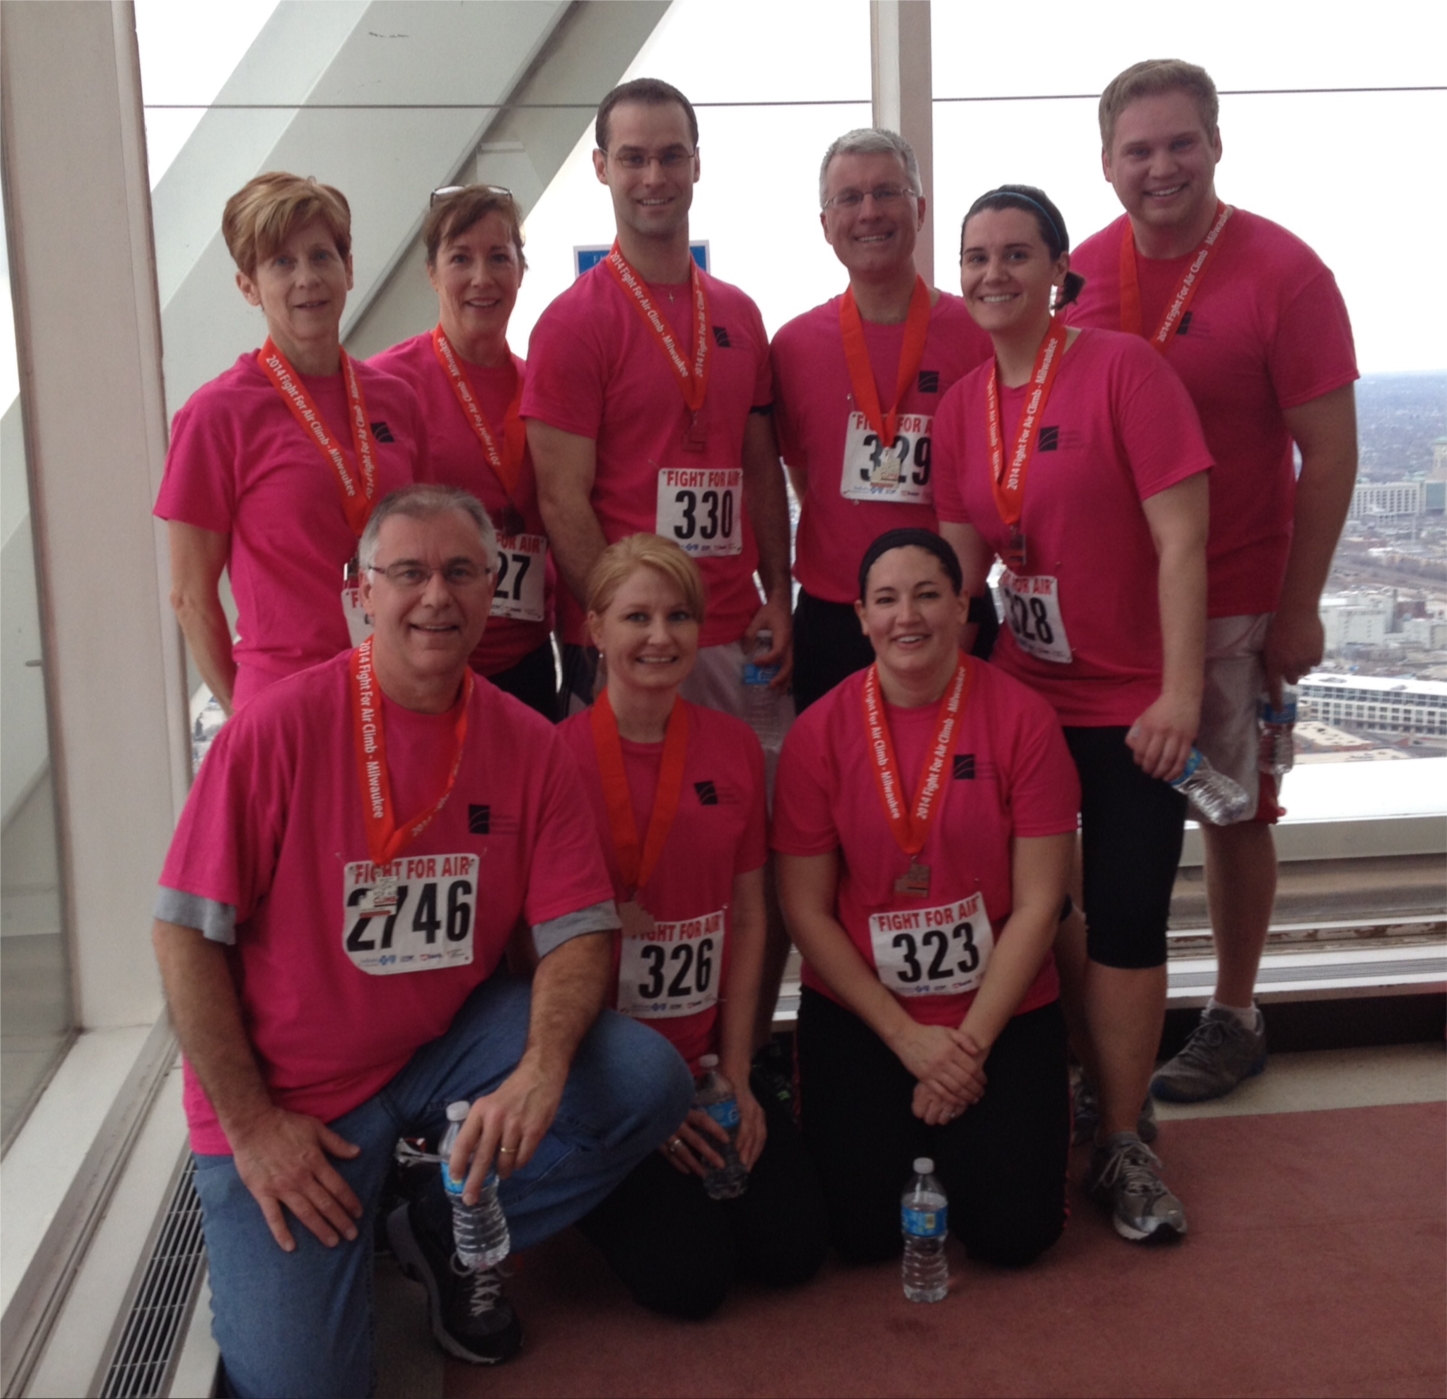 2014 Fight For Air Climb participants from our Milwaukee office.